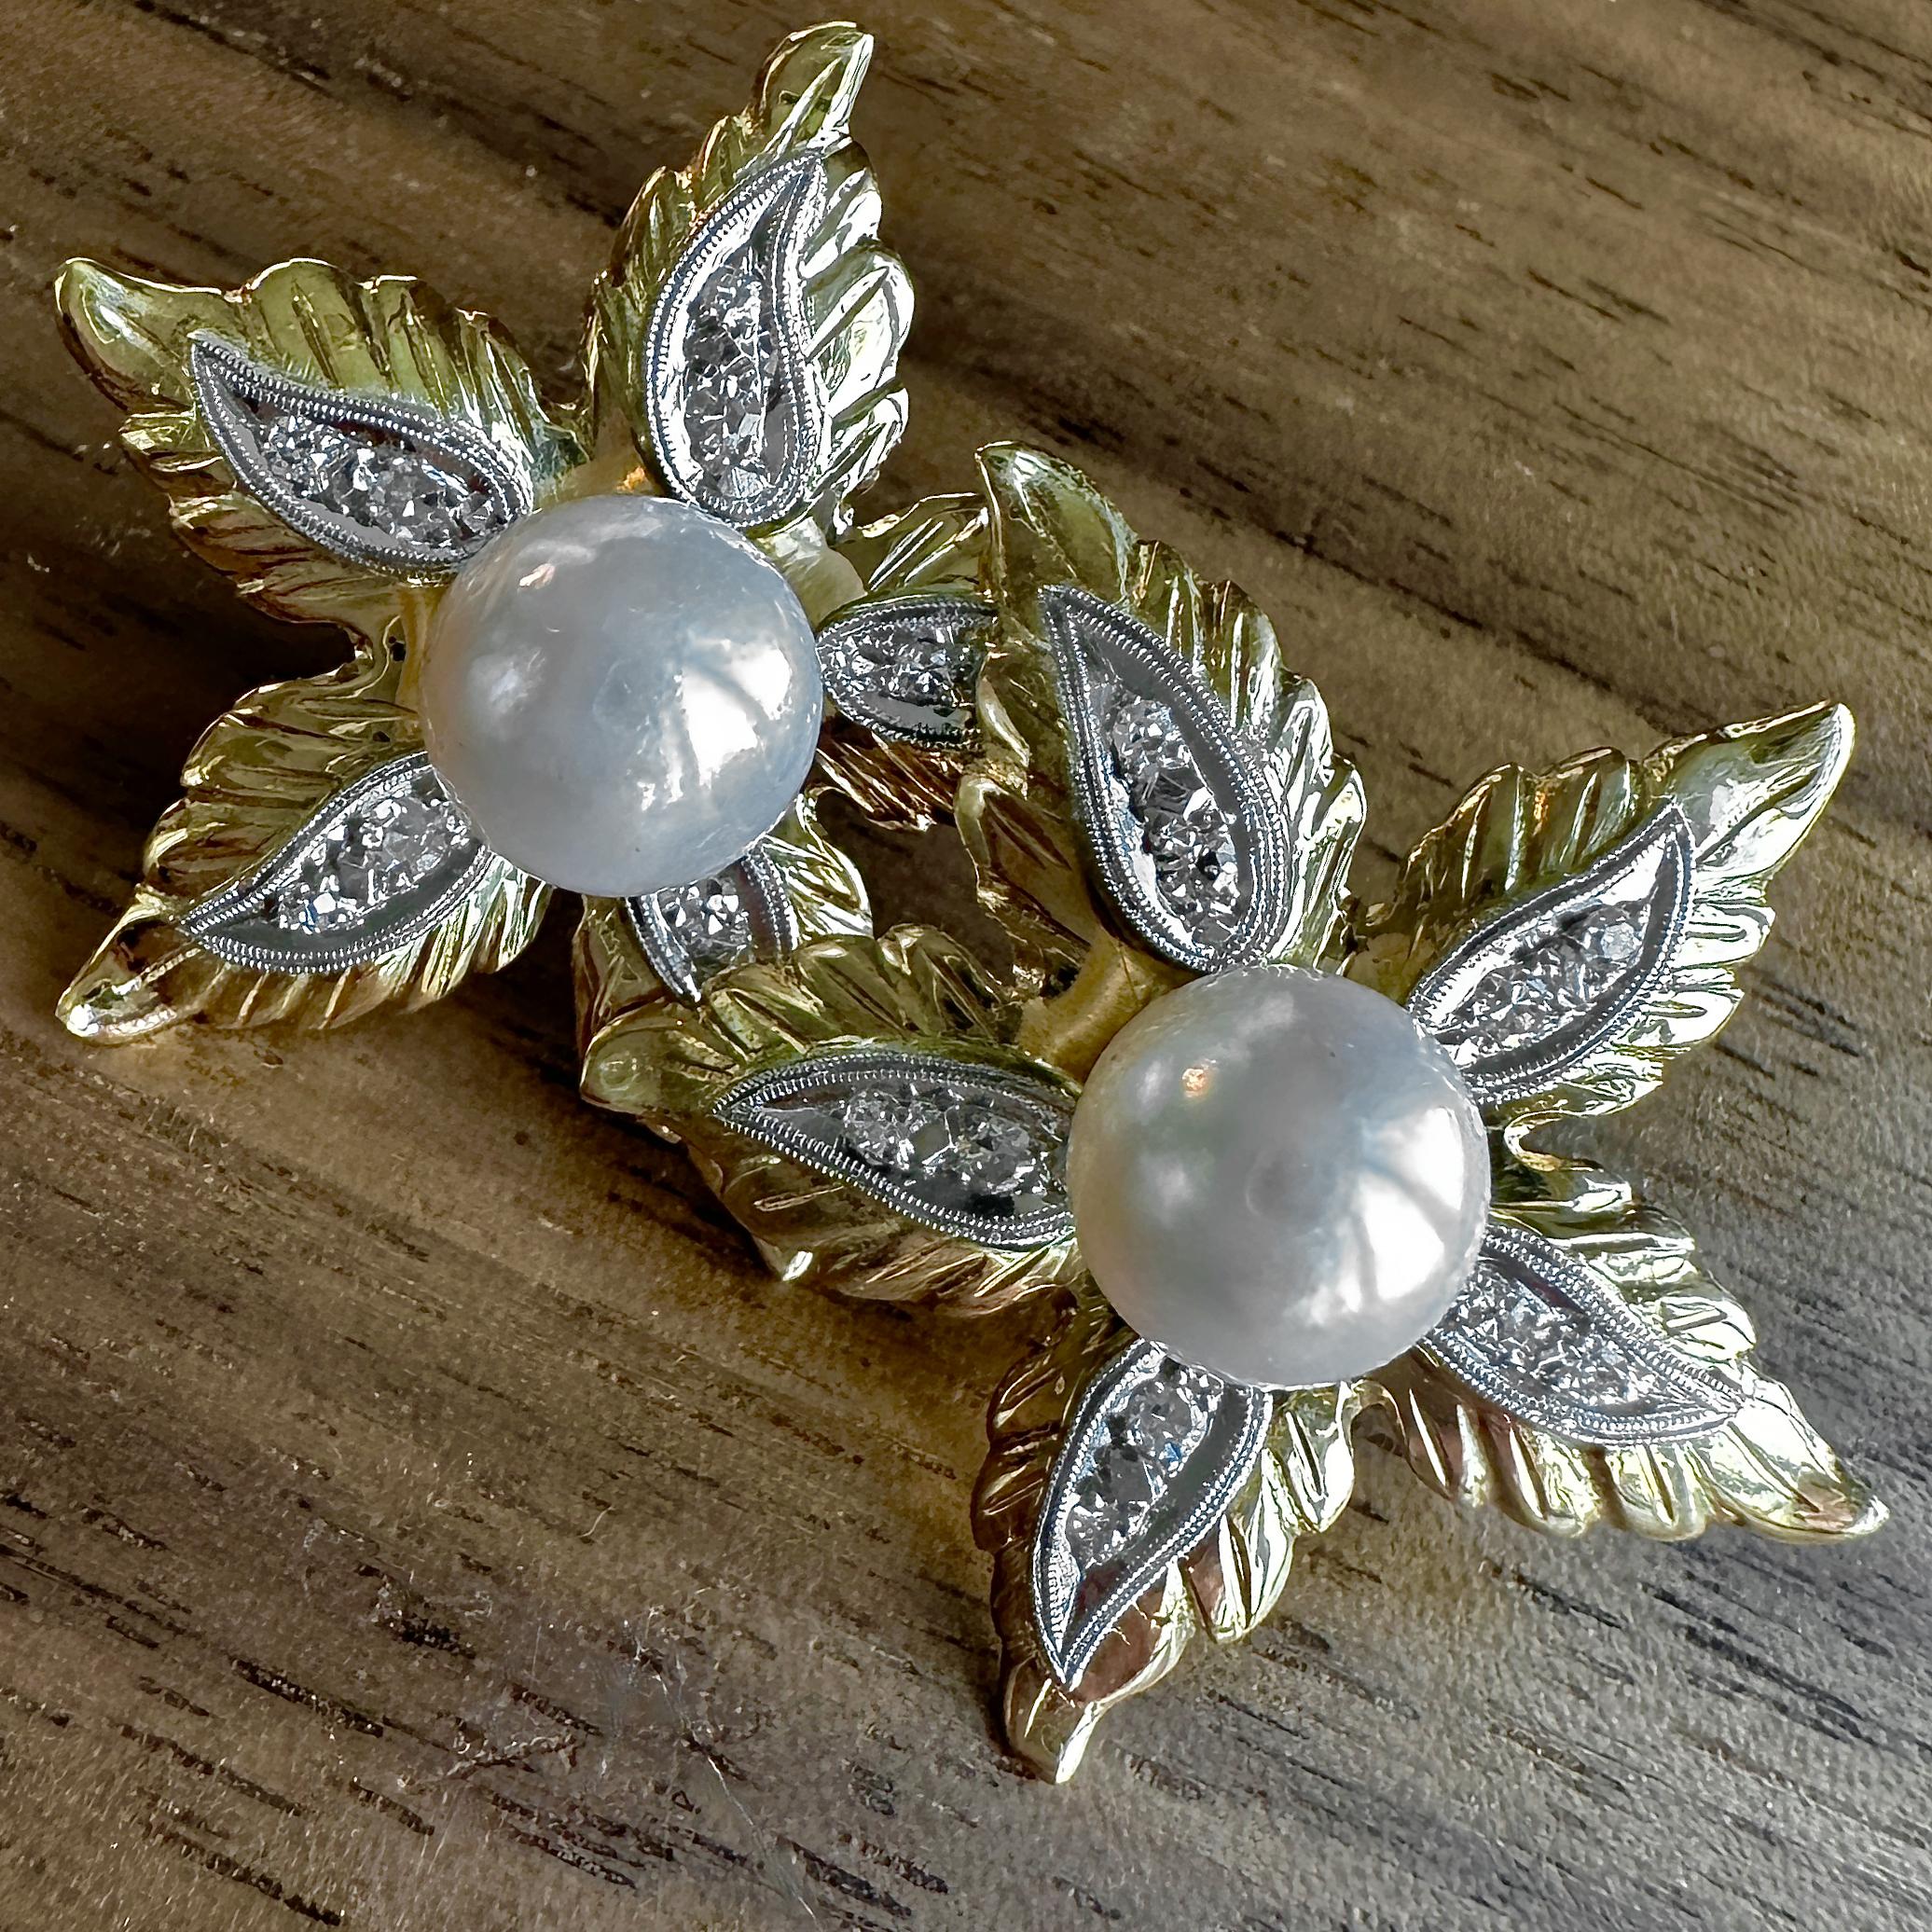 8.5mm Akoya Pearls in Large Flower Earrings of 18K Gold & Platinum with Diamonds For Sale 2